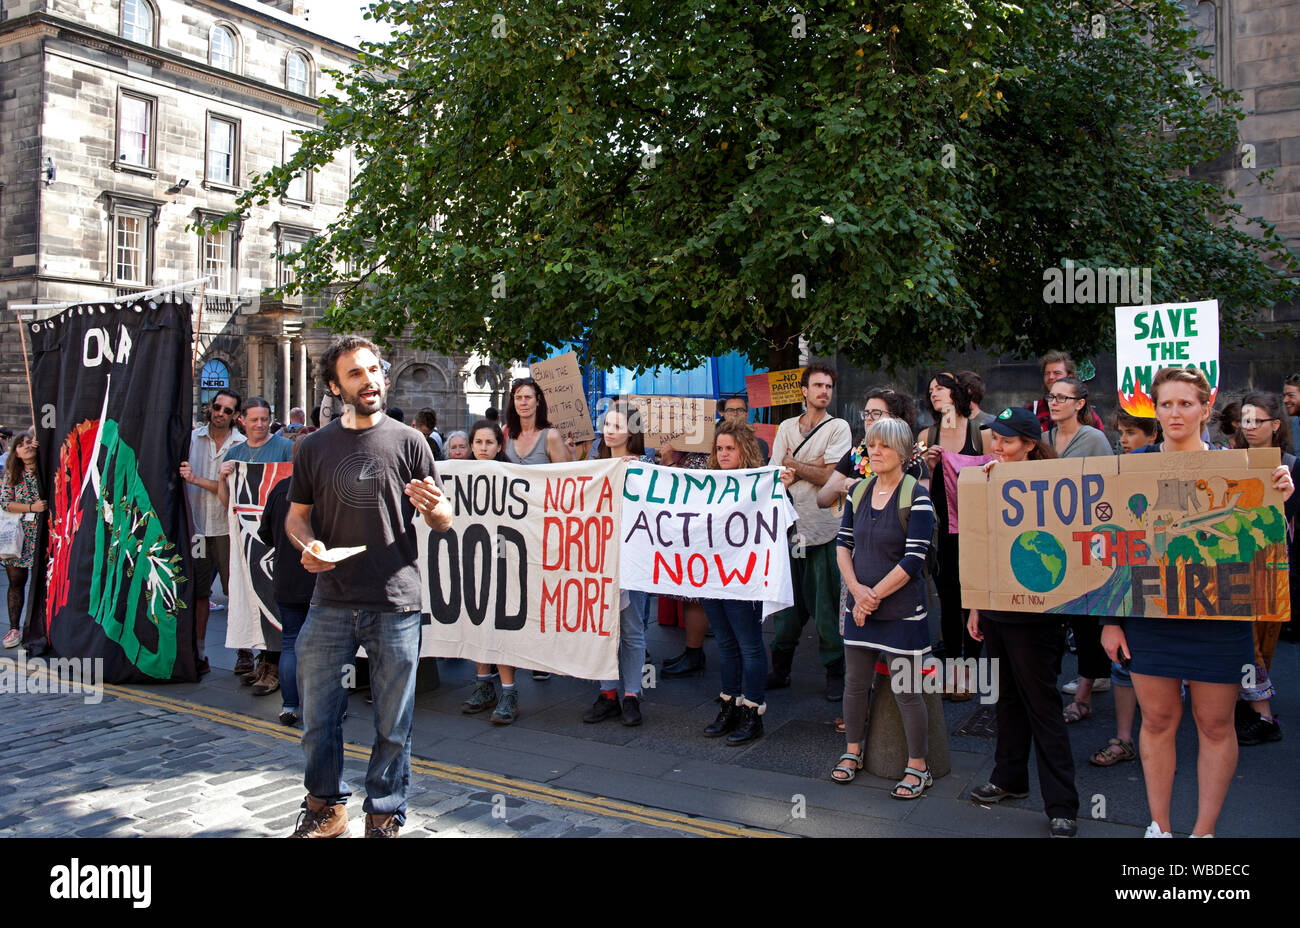 Edinburgh, Scotland, UK. 26th Aug, 2019. Approximately fifty demonstrators assembled peacefully in the High Street outside St Giles Cathedral to demonstrate against the the UK Governments 'criminal inaction on the climate and ecological crisis' the group classed it as a Non Violent Extinction Rebellion. They were accompanied by a minimum of twenty uniformed Police Officers. They claim they are protesting to persuade the government to take emergency action on the Climate and Ecological crisis. Stock Photo